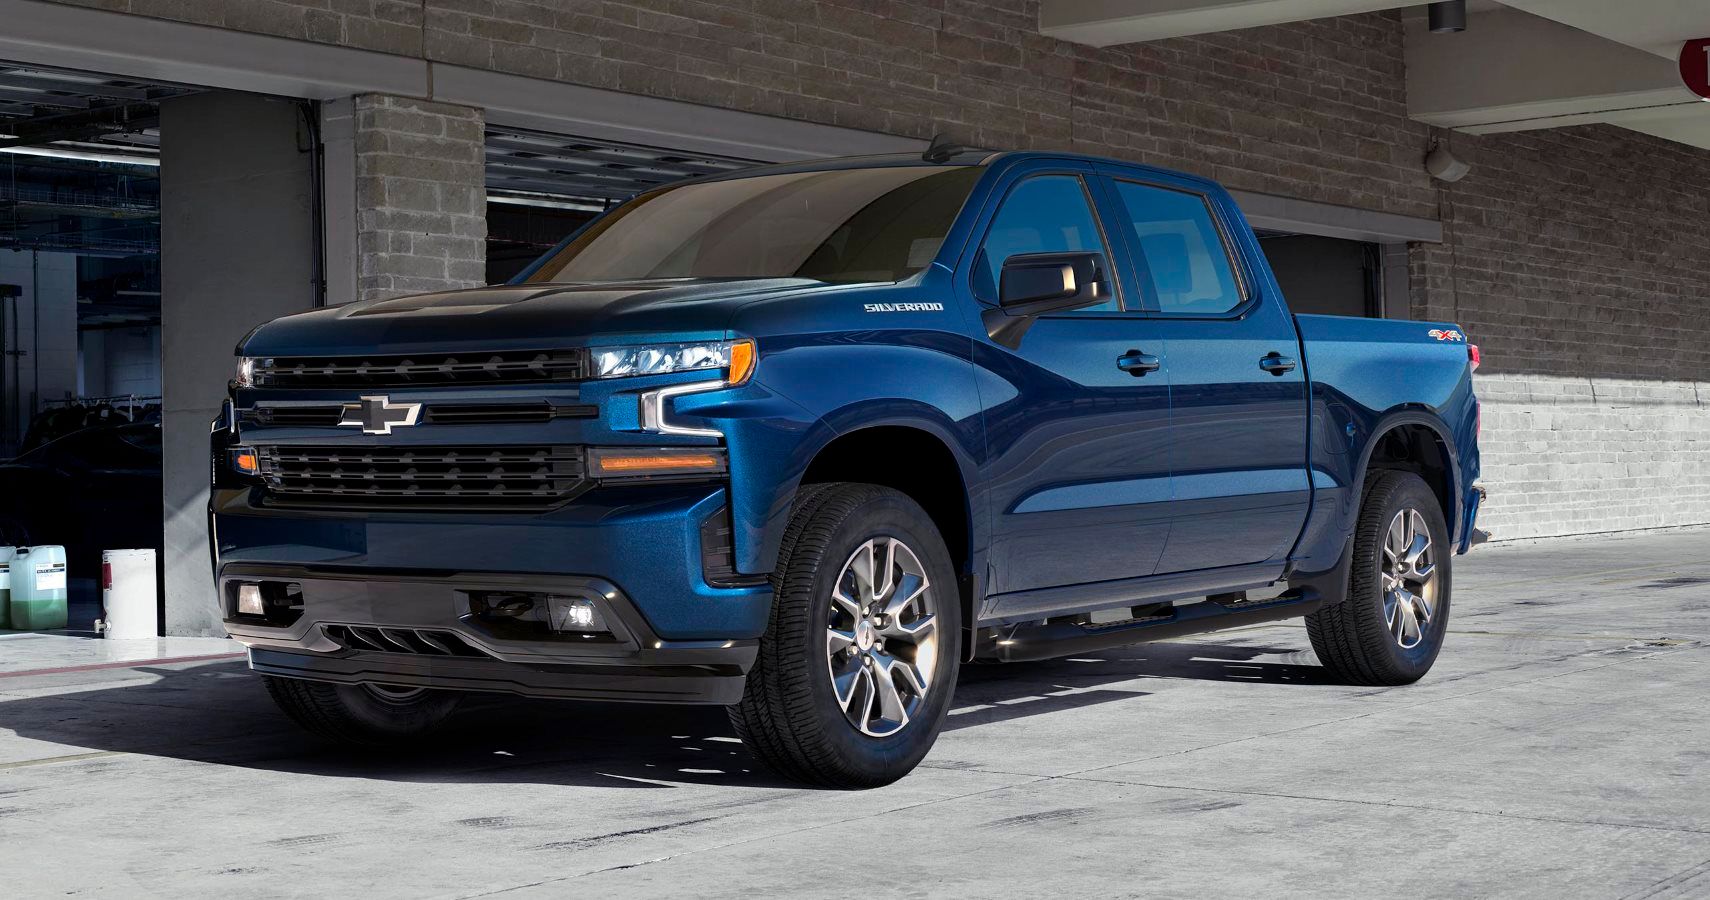 Chevrolet Silverado’s Huge Four-Cylinder Engine Gets Official Fuel Economy Numbers